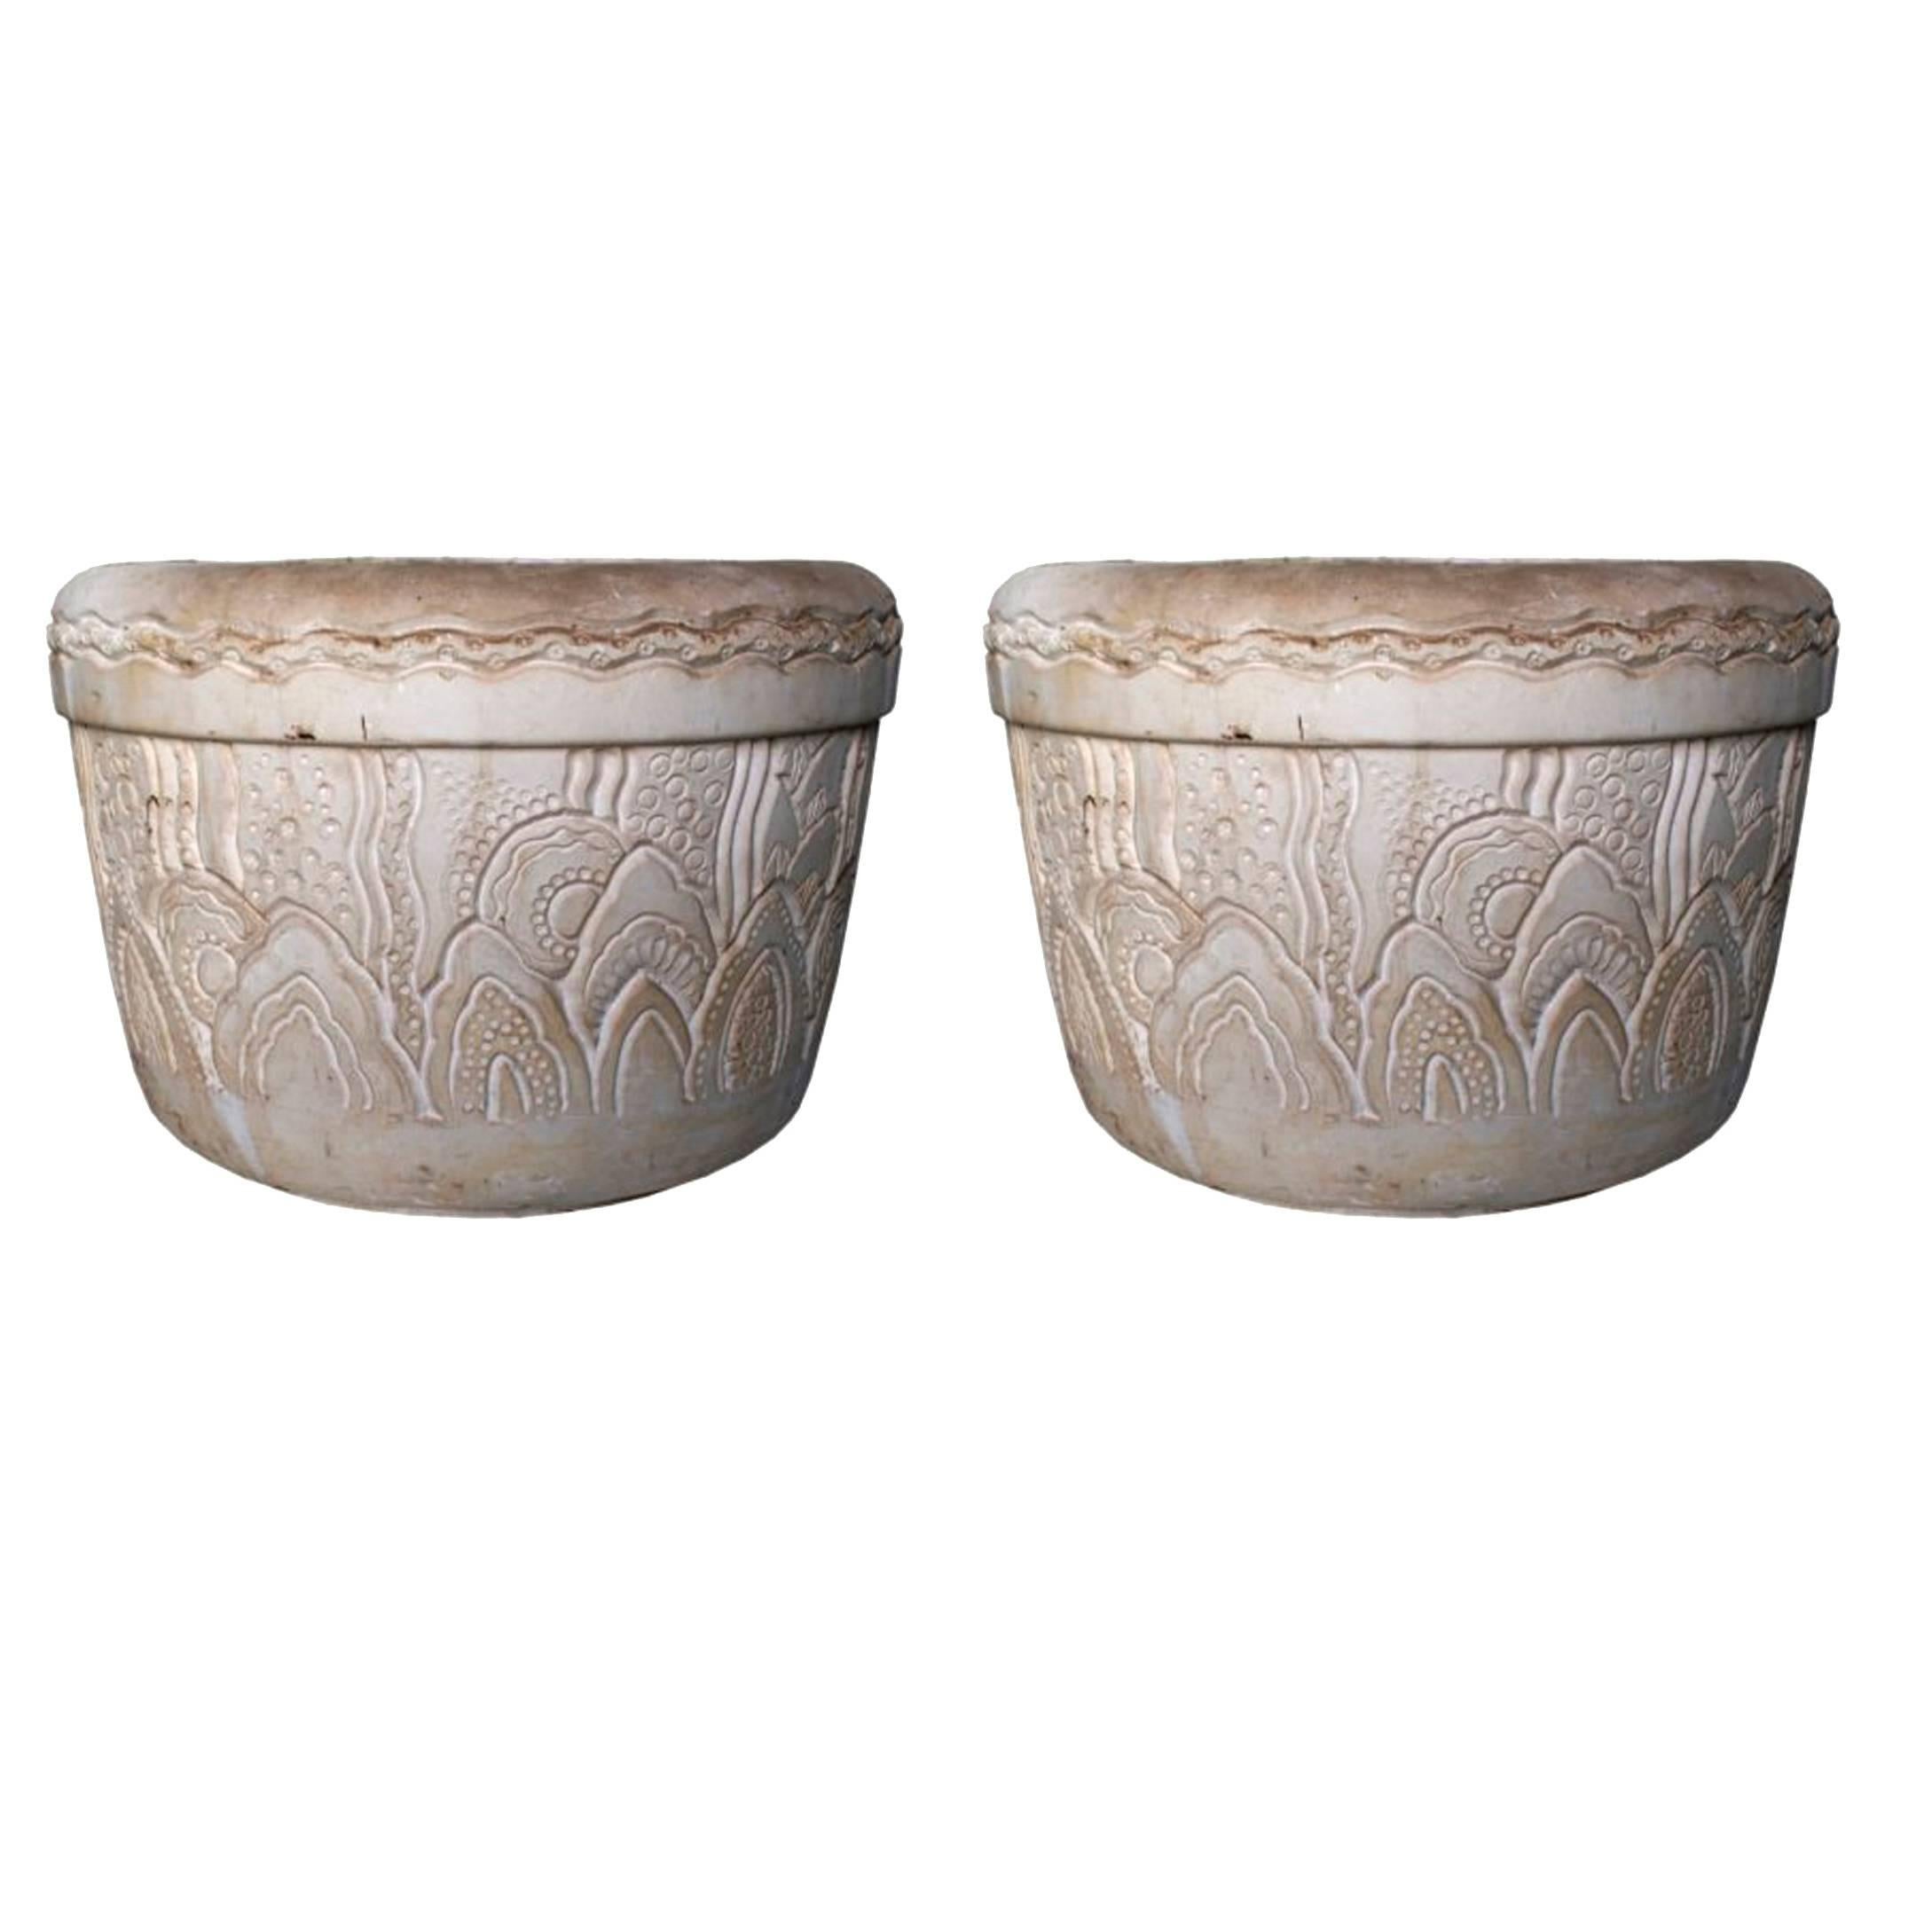 Charles Hairon, Pair of Large Flower Pot, circa 1920 For Sale